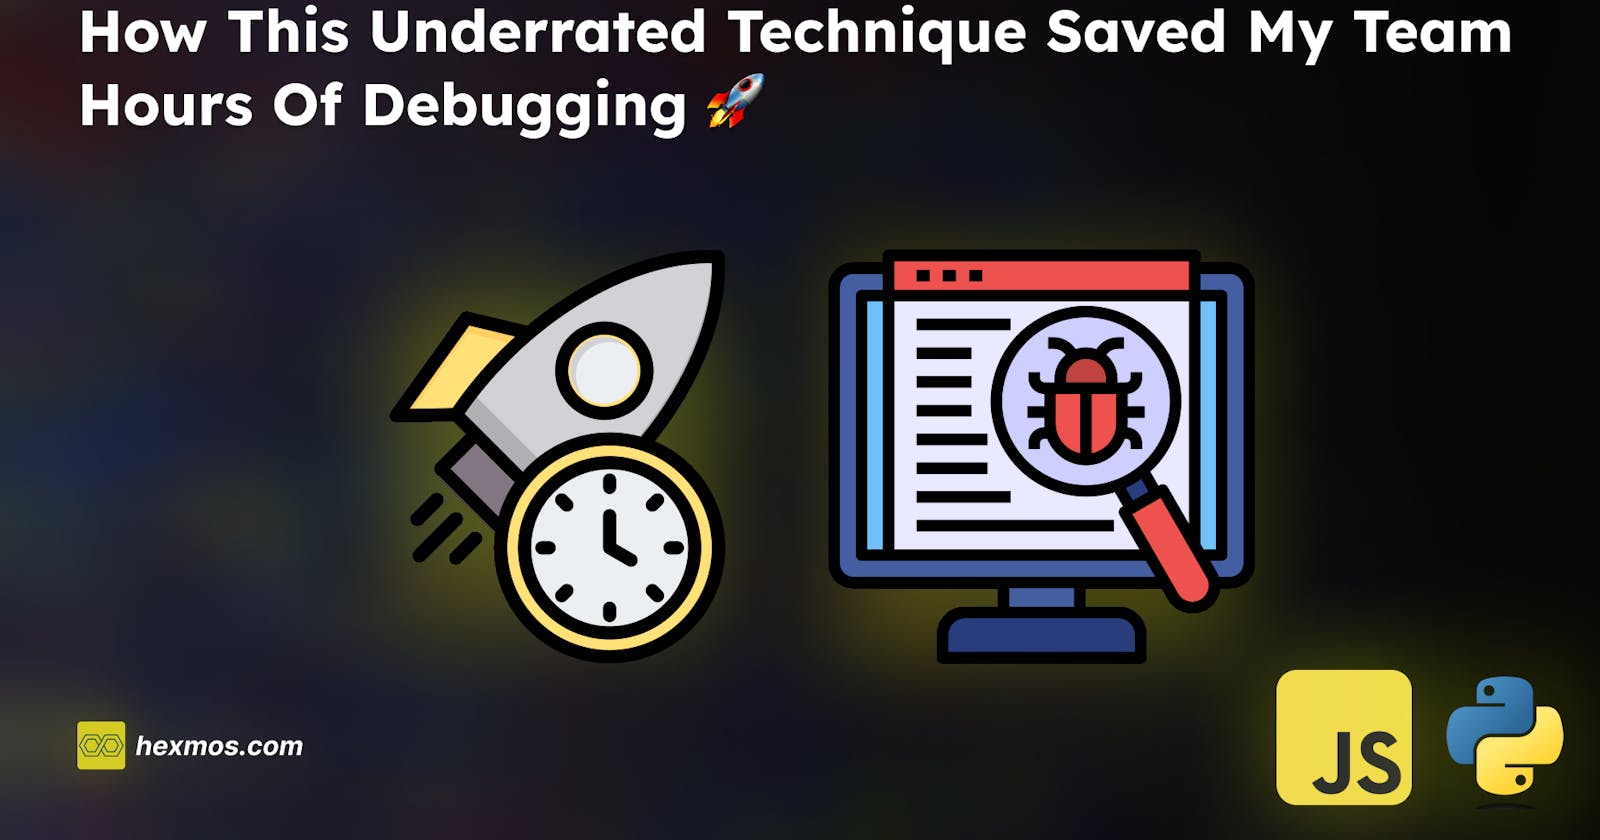 How This Underrated Technique Saved My Team Hours of Debugging